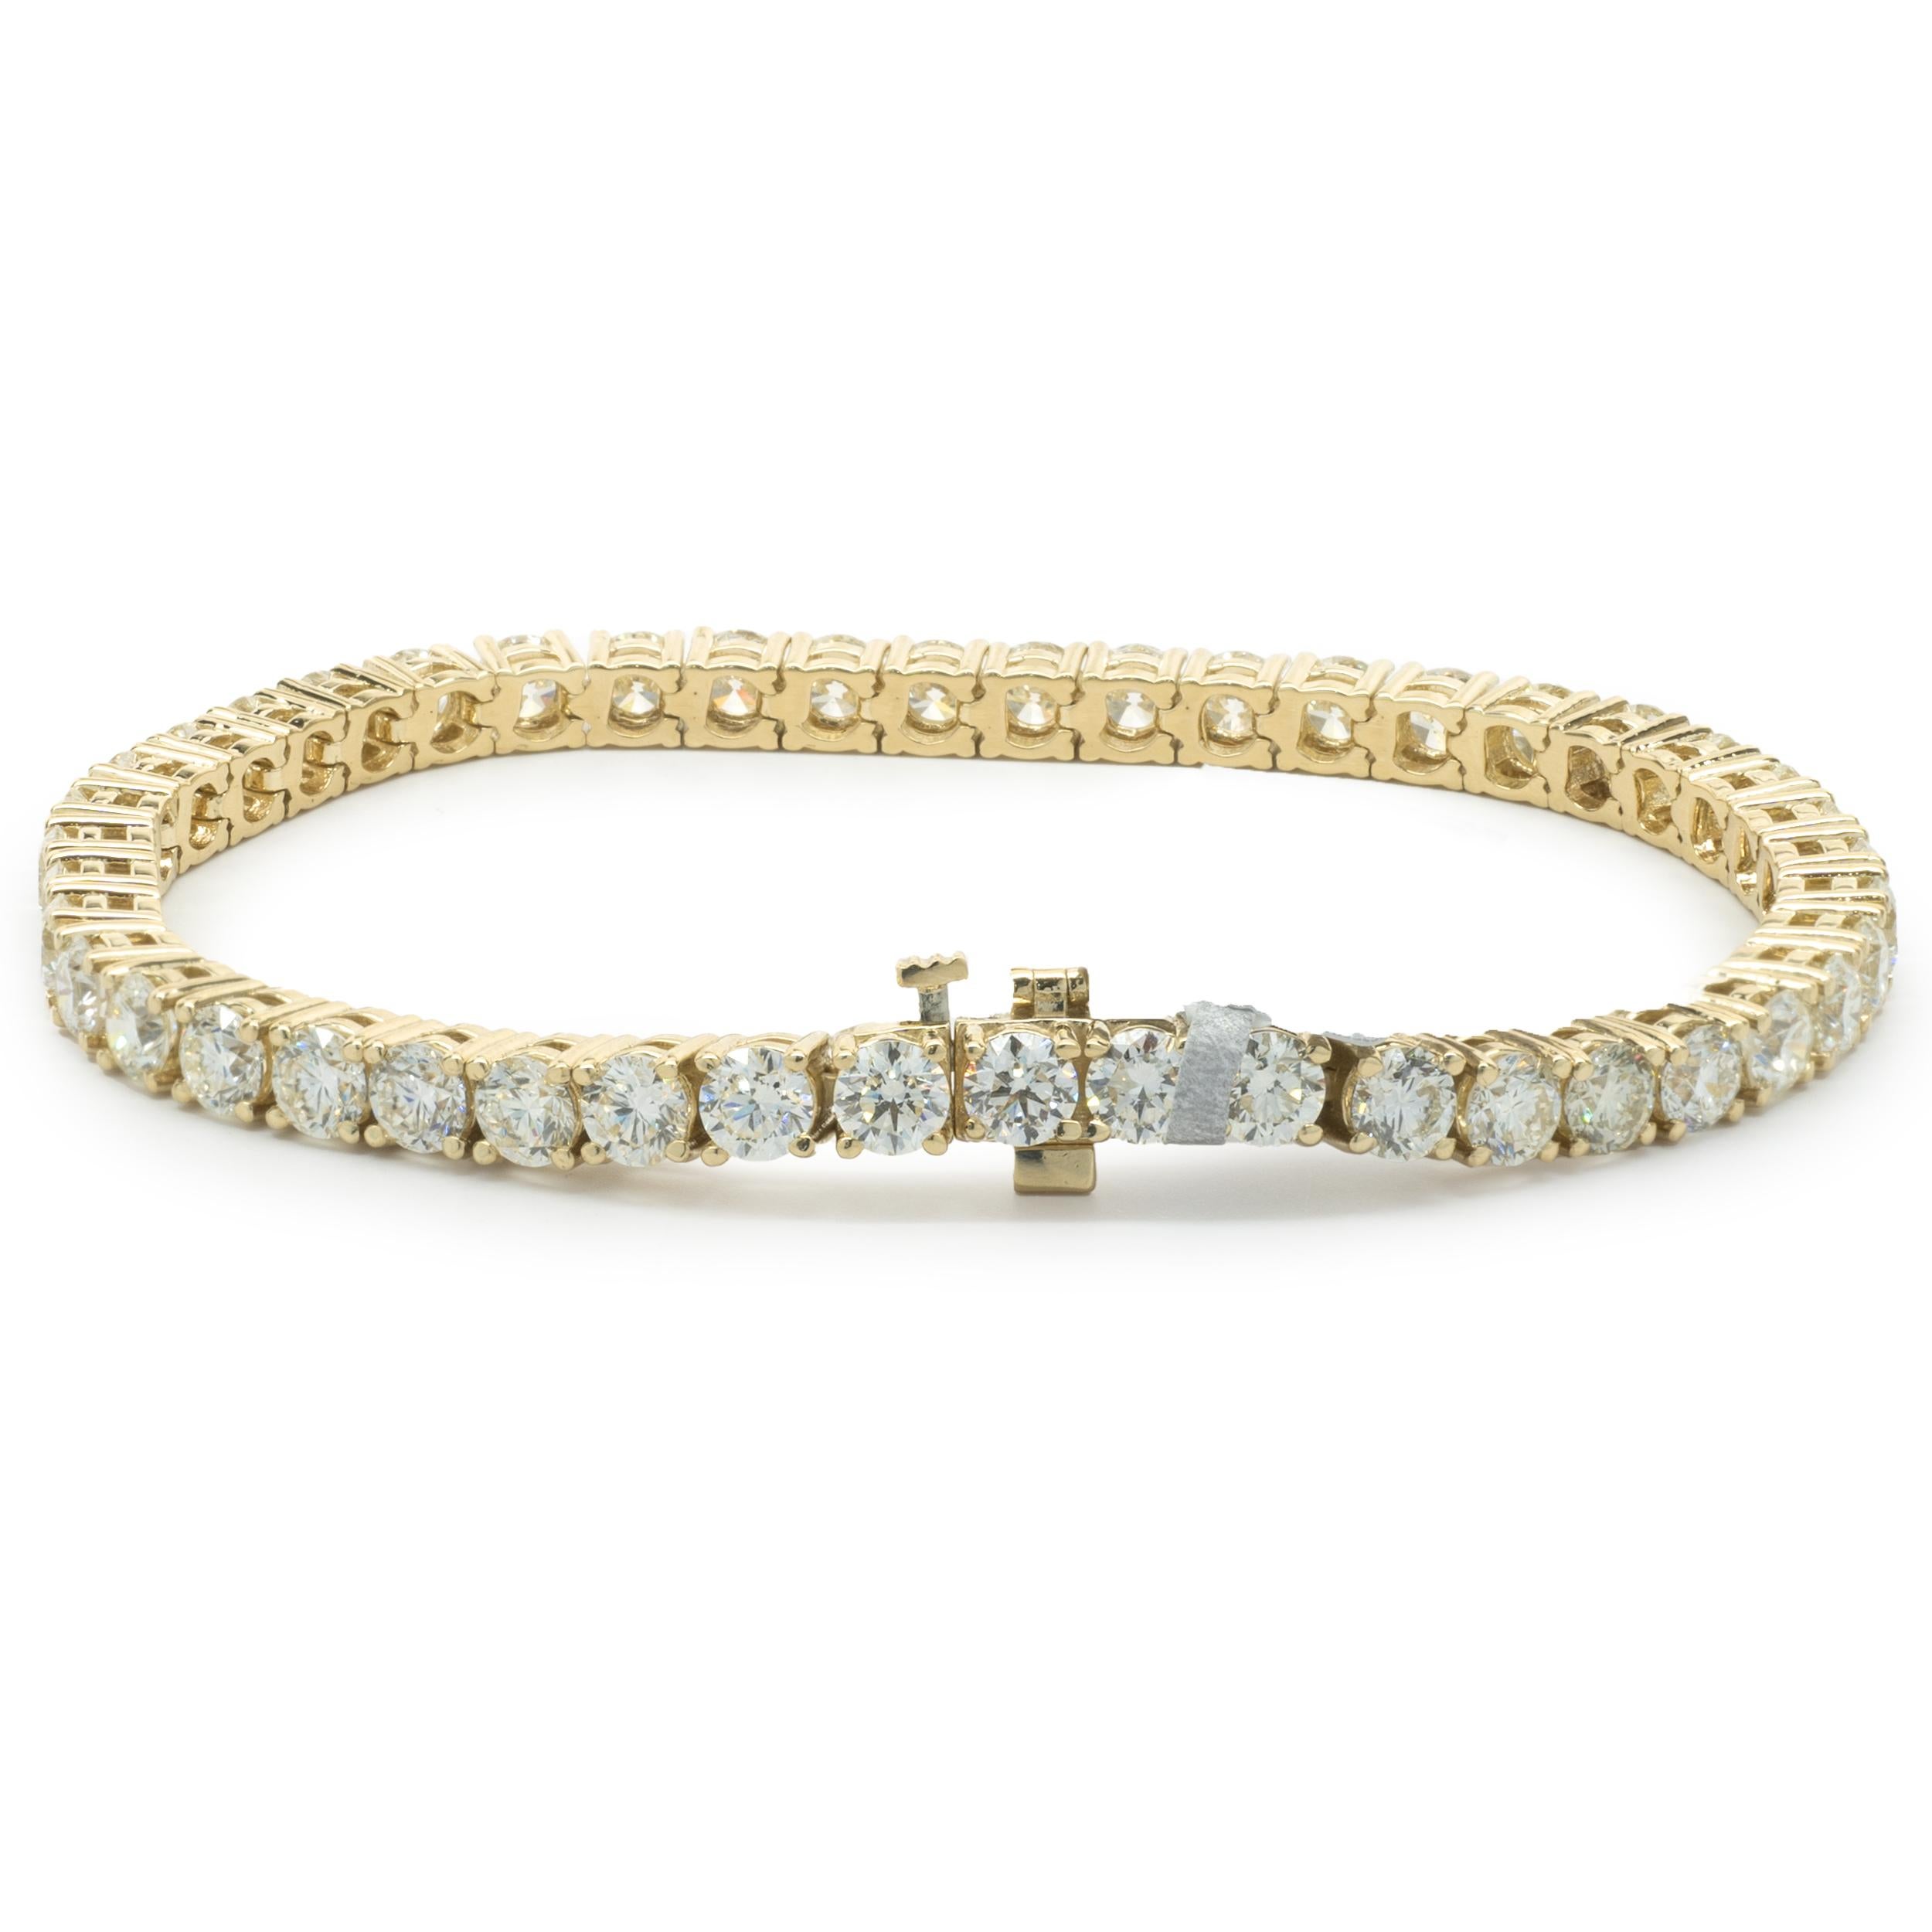 Designer: custom
Material: 14K yellow gold
Diamond: 43 round brilliant= 10.98cttw
Color: G / H
Clarity: VS2-SI1
Dimensions: bracelet will fit up to a 7-inch wrist
Weight: 15.96 grams
